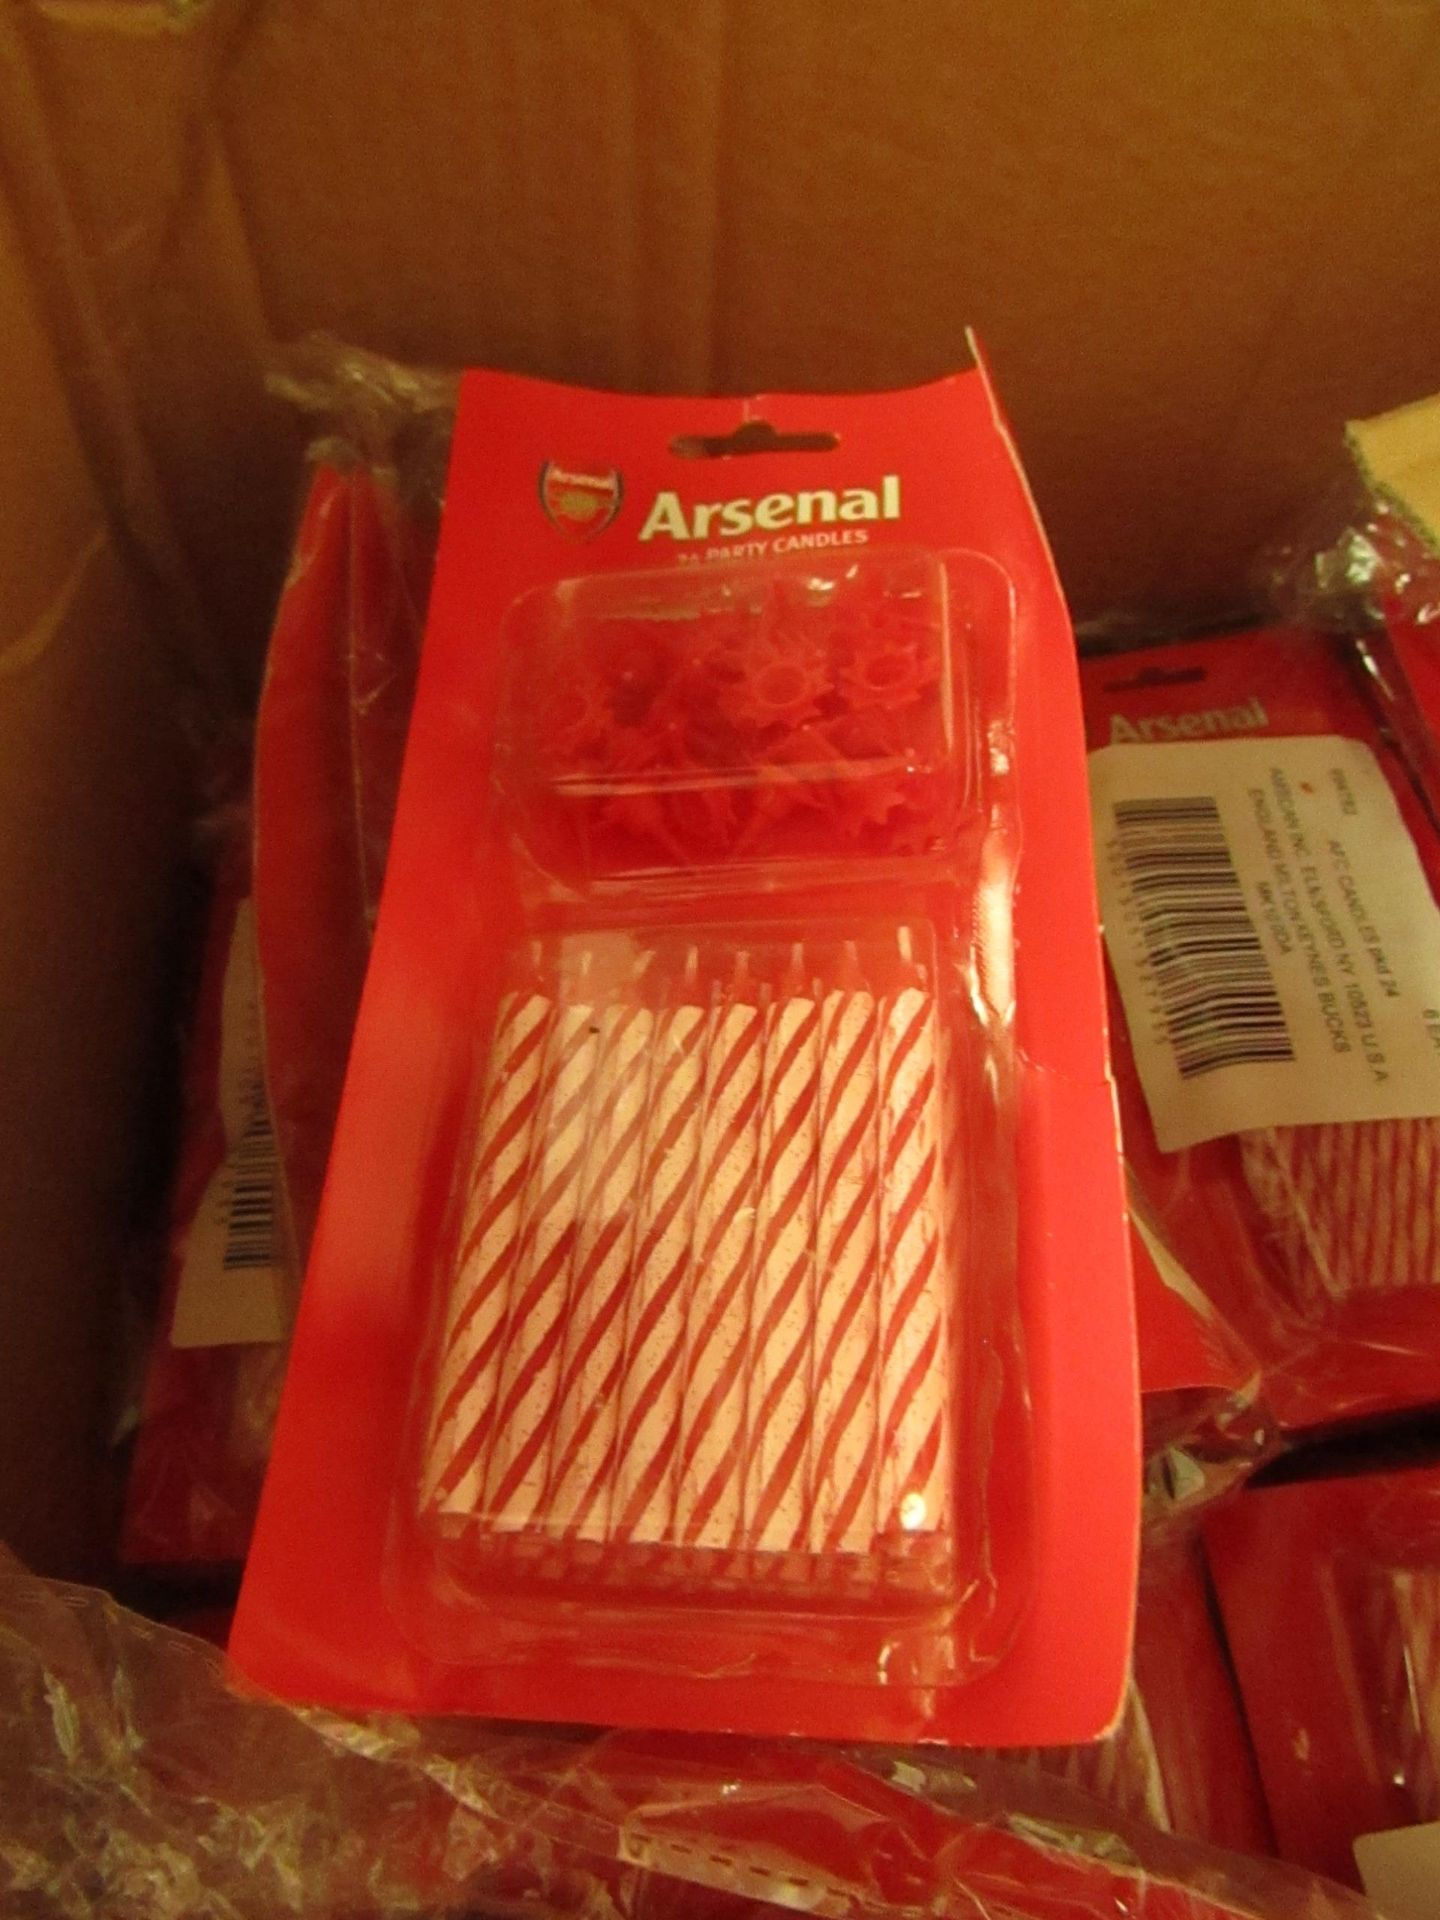 4x Arsenal - 24 Party Candles - New & Packaged.